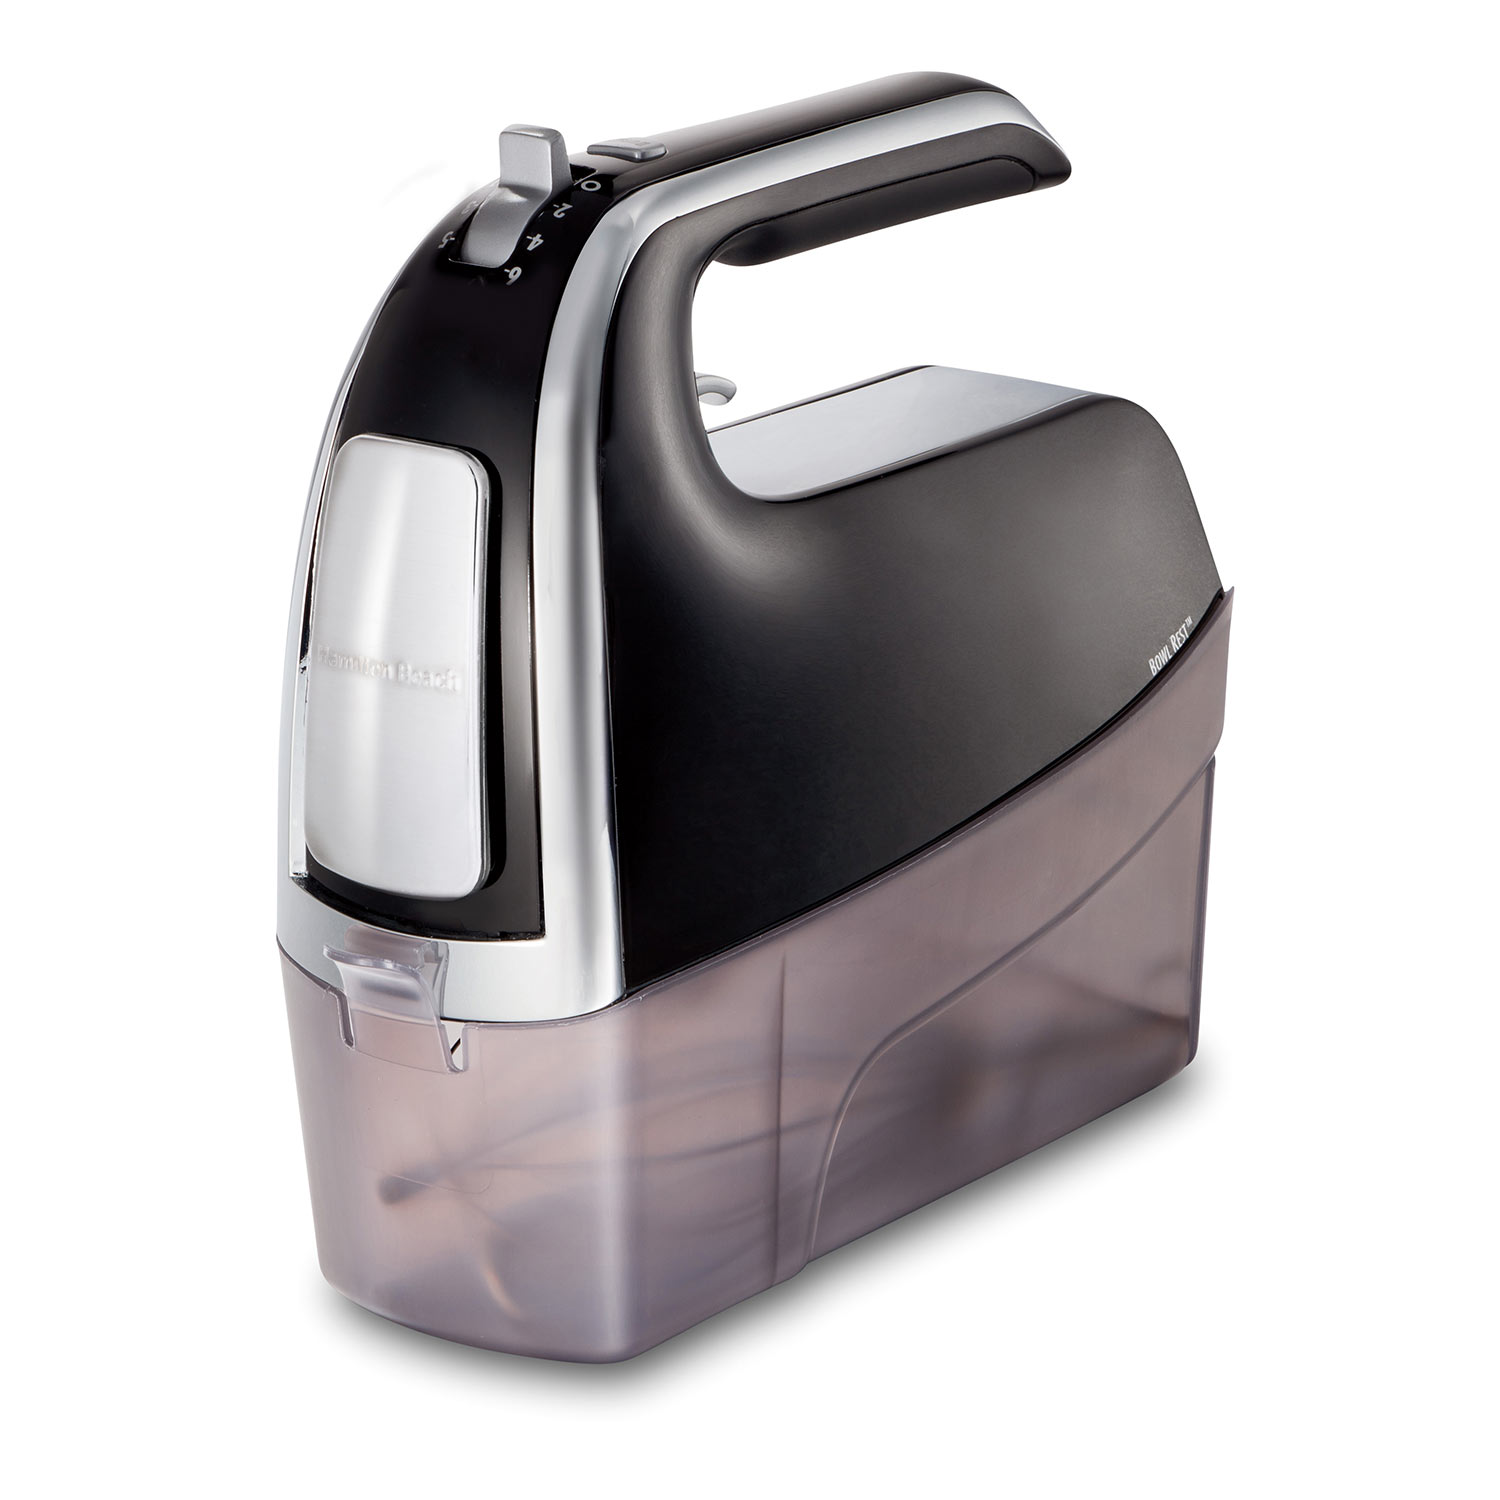 Recertified 6 Speed Hand Mixer with Pulse and Snap-On Case (R2002)